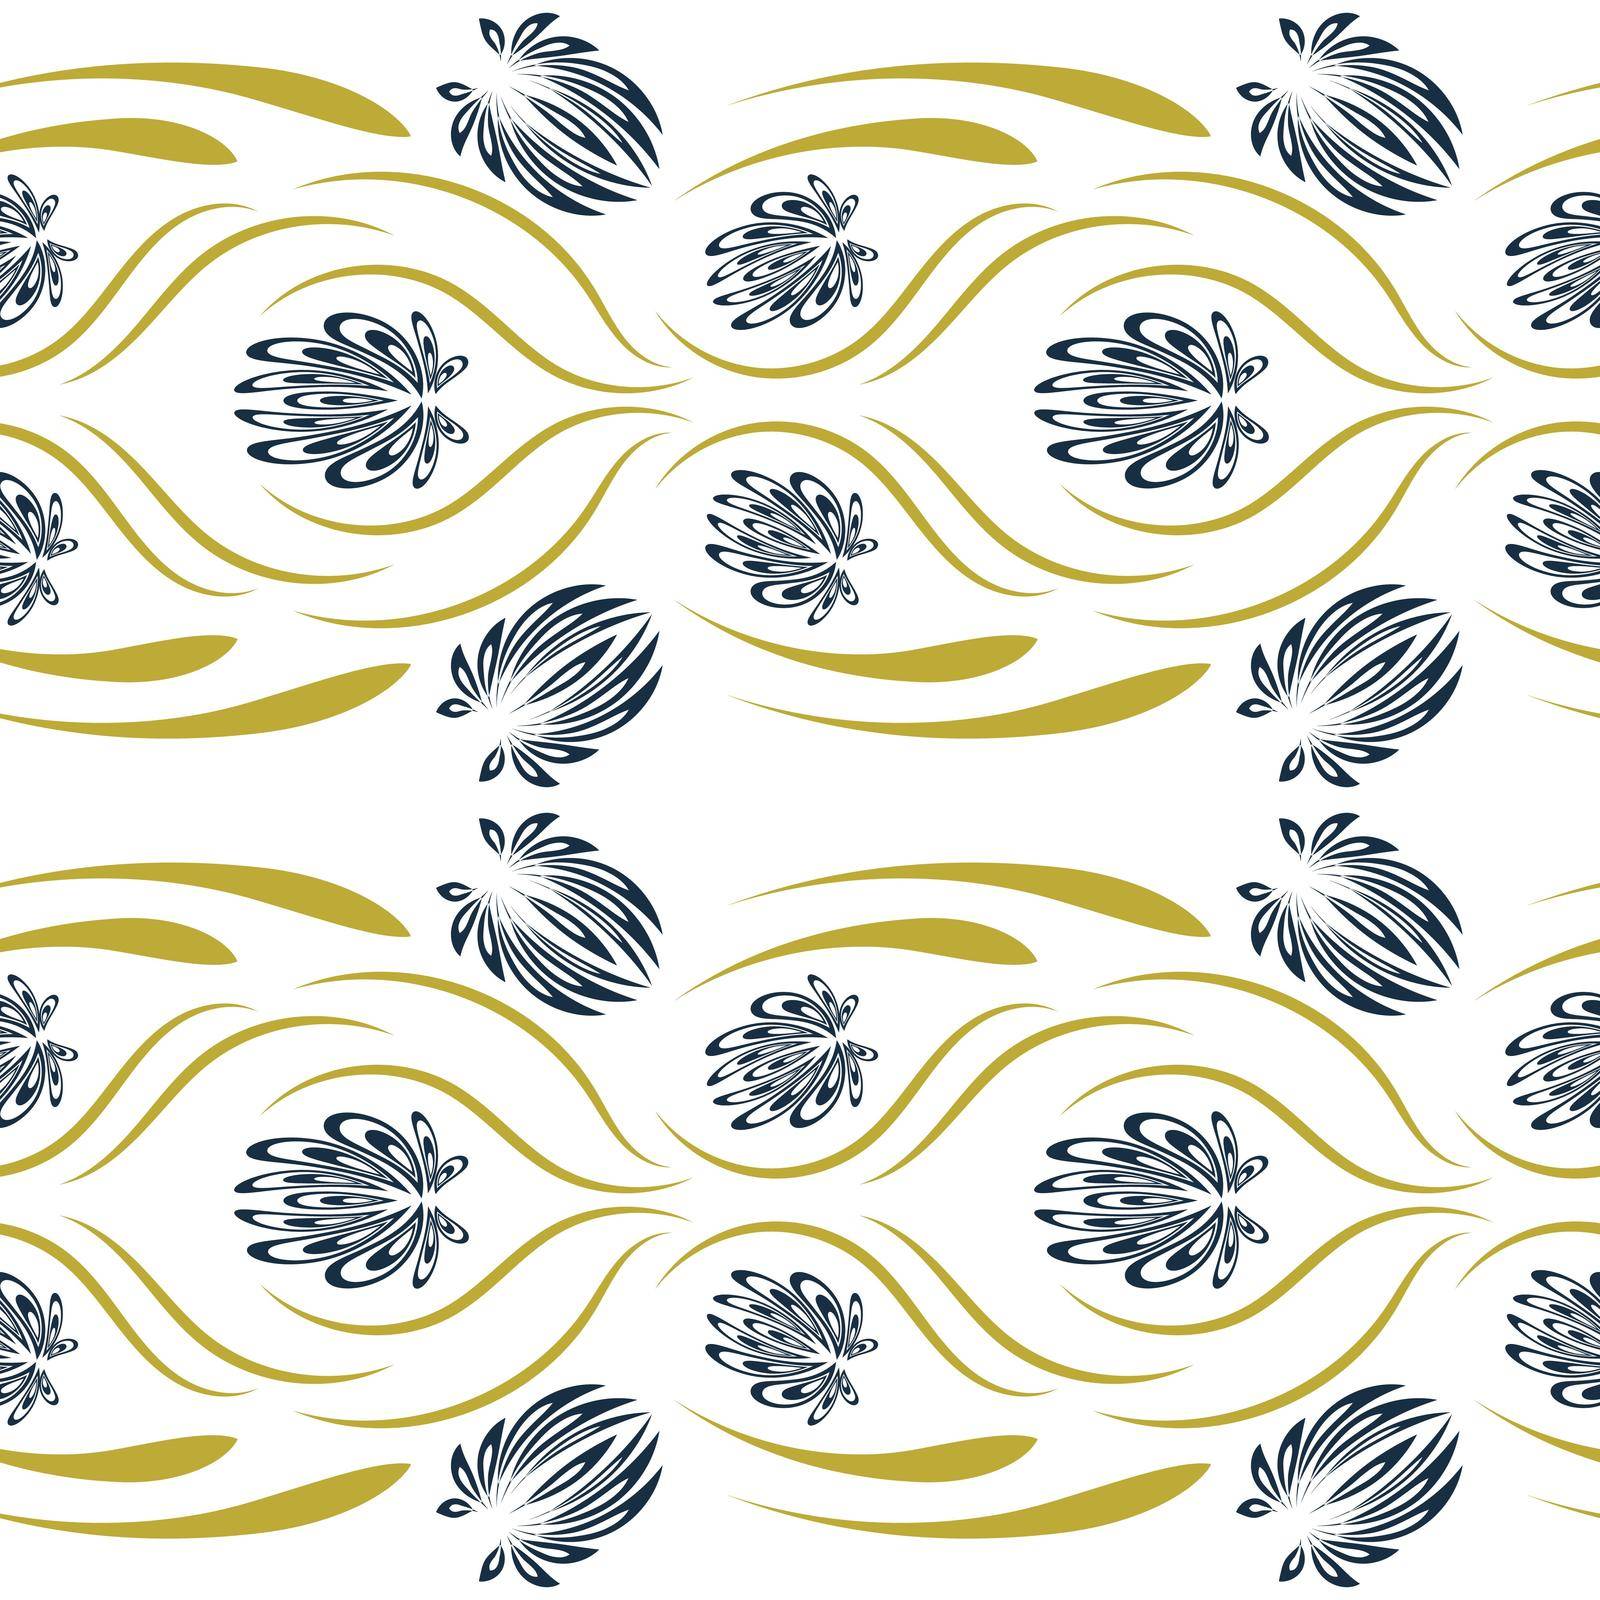 Floral pattern with flowers and leaves  Fantasy flowers Abstract Floral geometric fantasy    